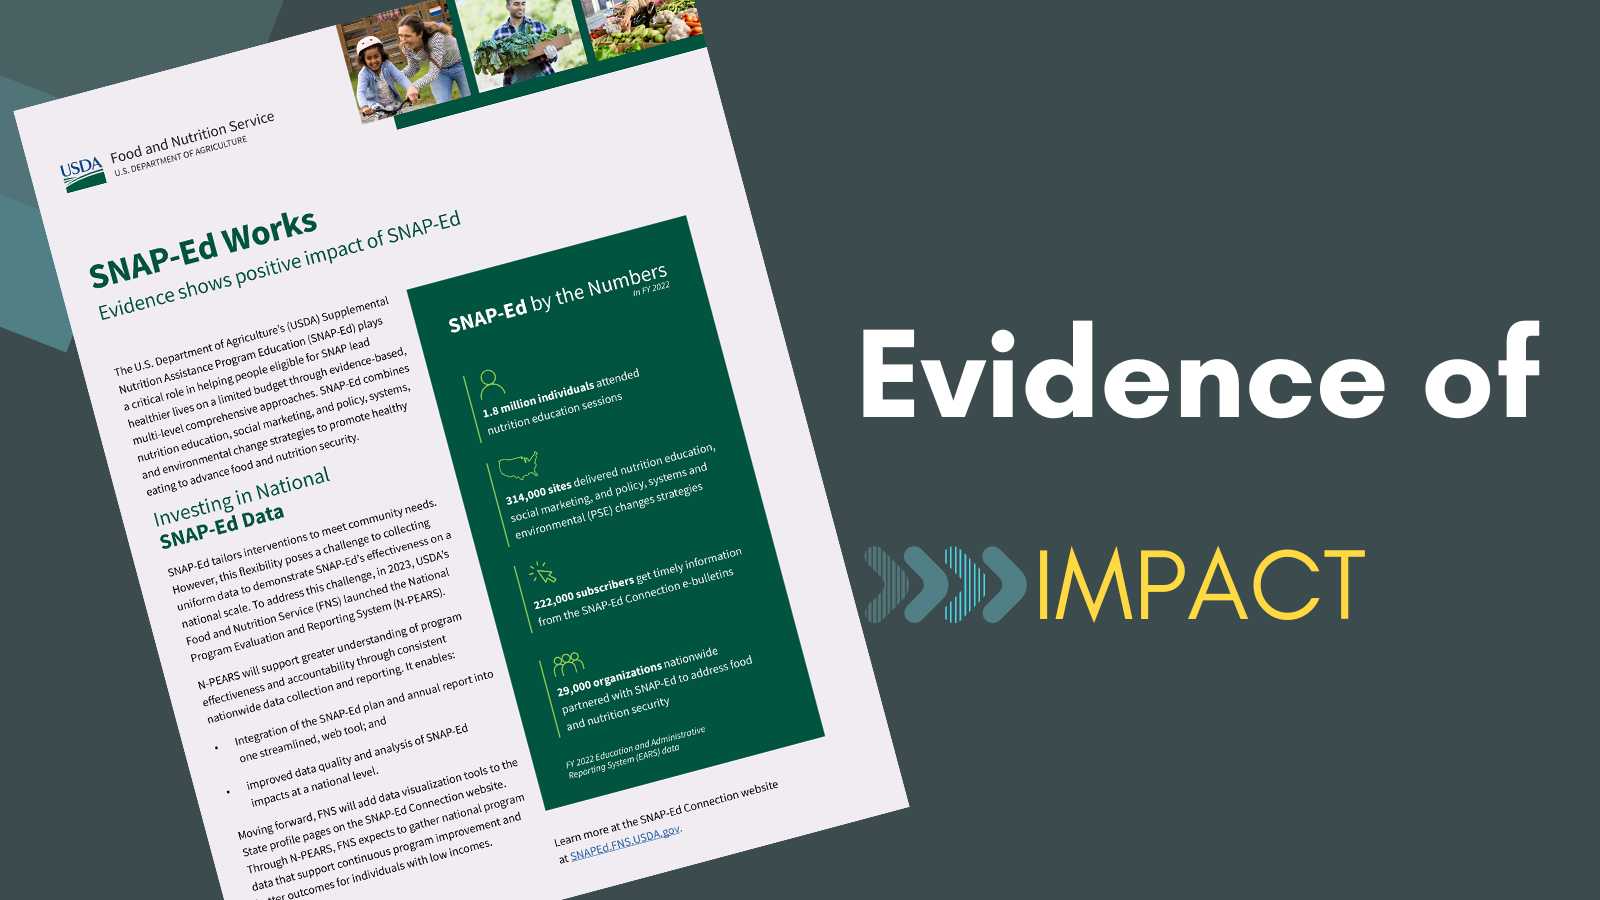 thumbnail of SNAP-Ed Works Fact Sheet and text "Evidence of Impact"